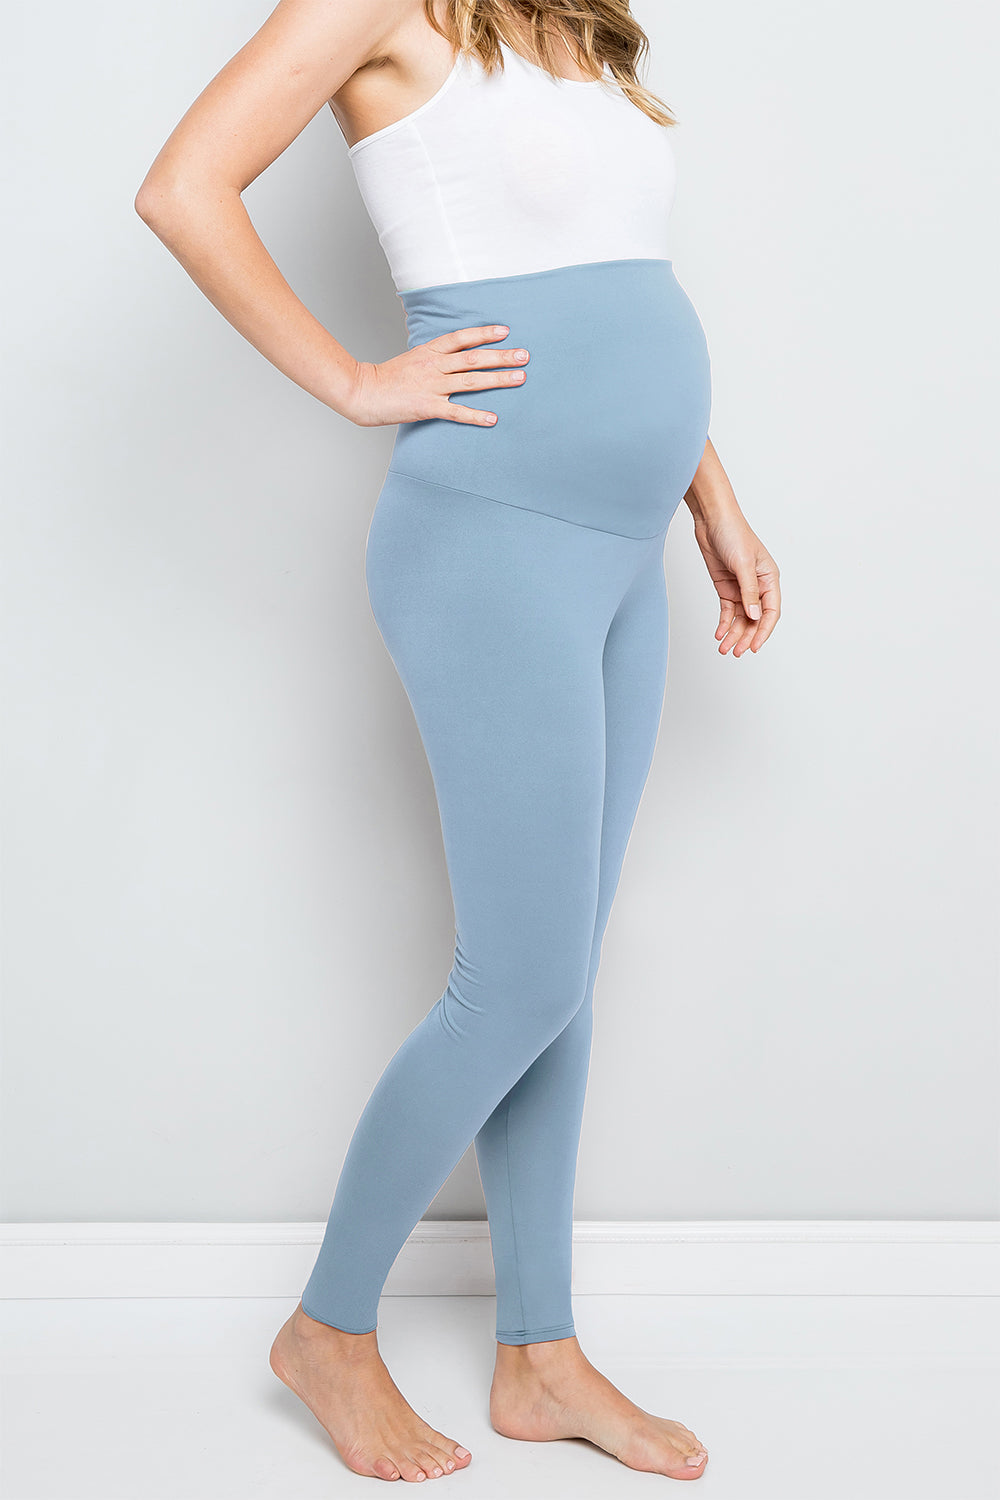 My Bump Buttery Ultra Soft Over the Belly Lounge Yoga Maternity Pants